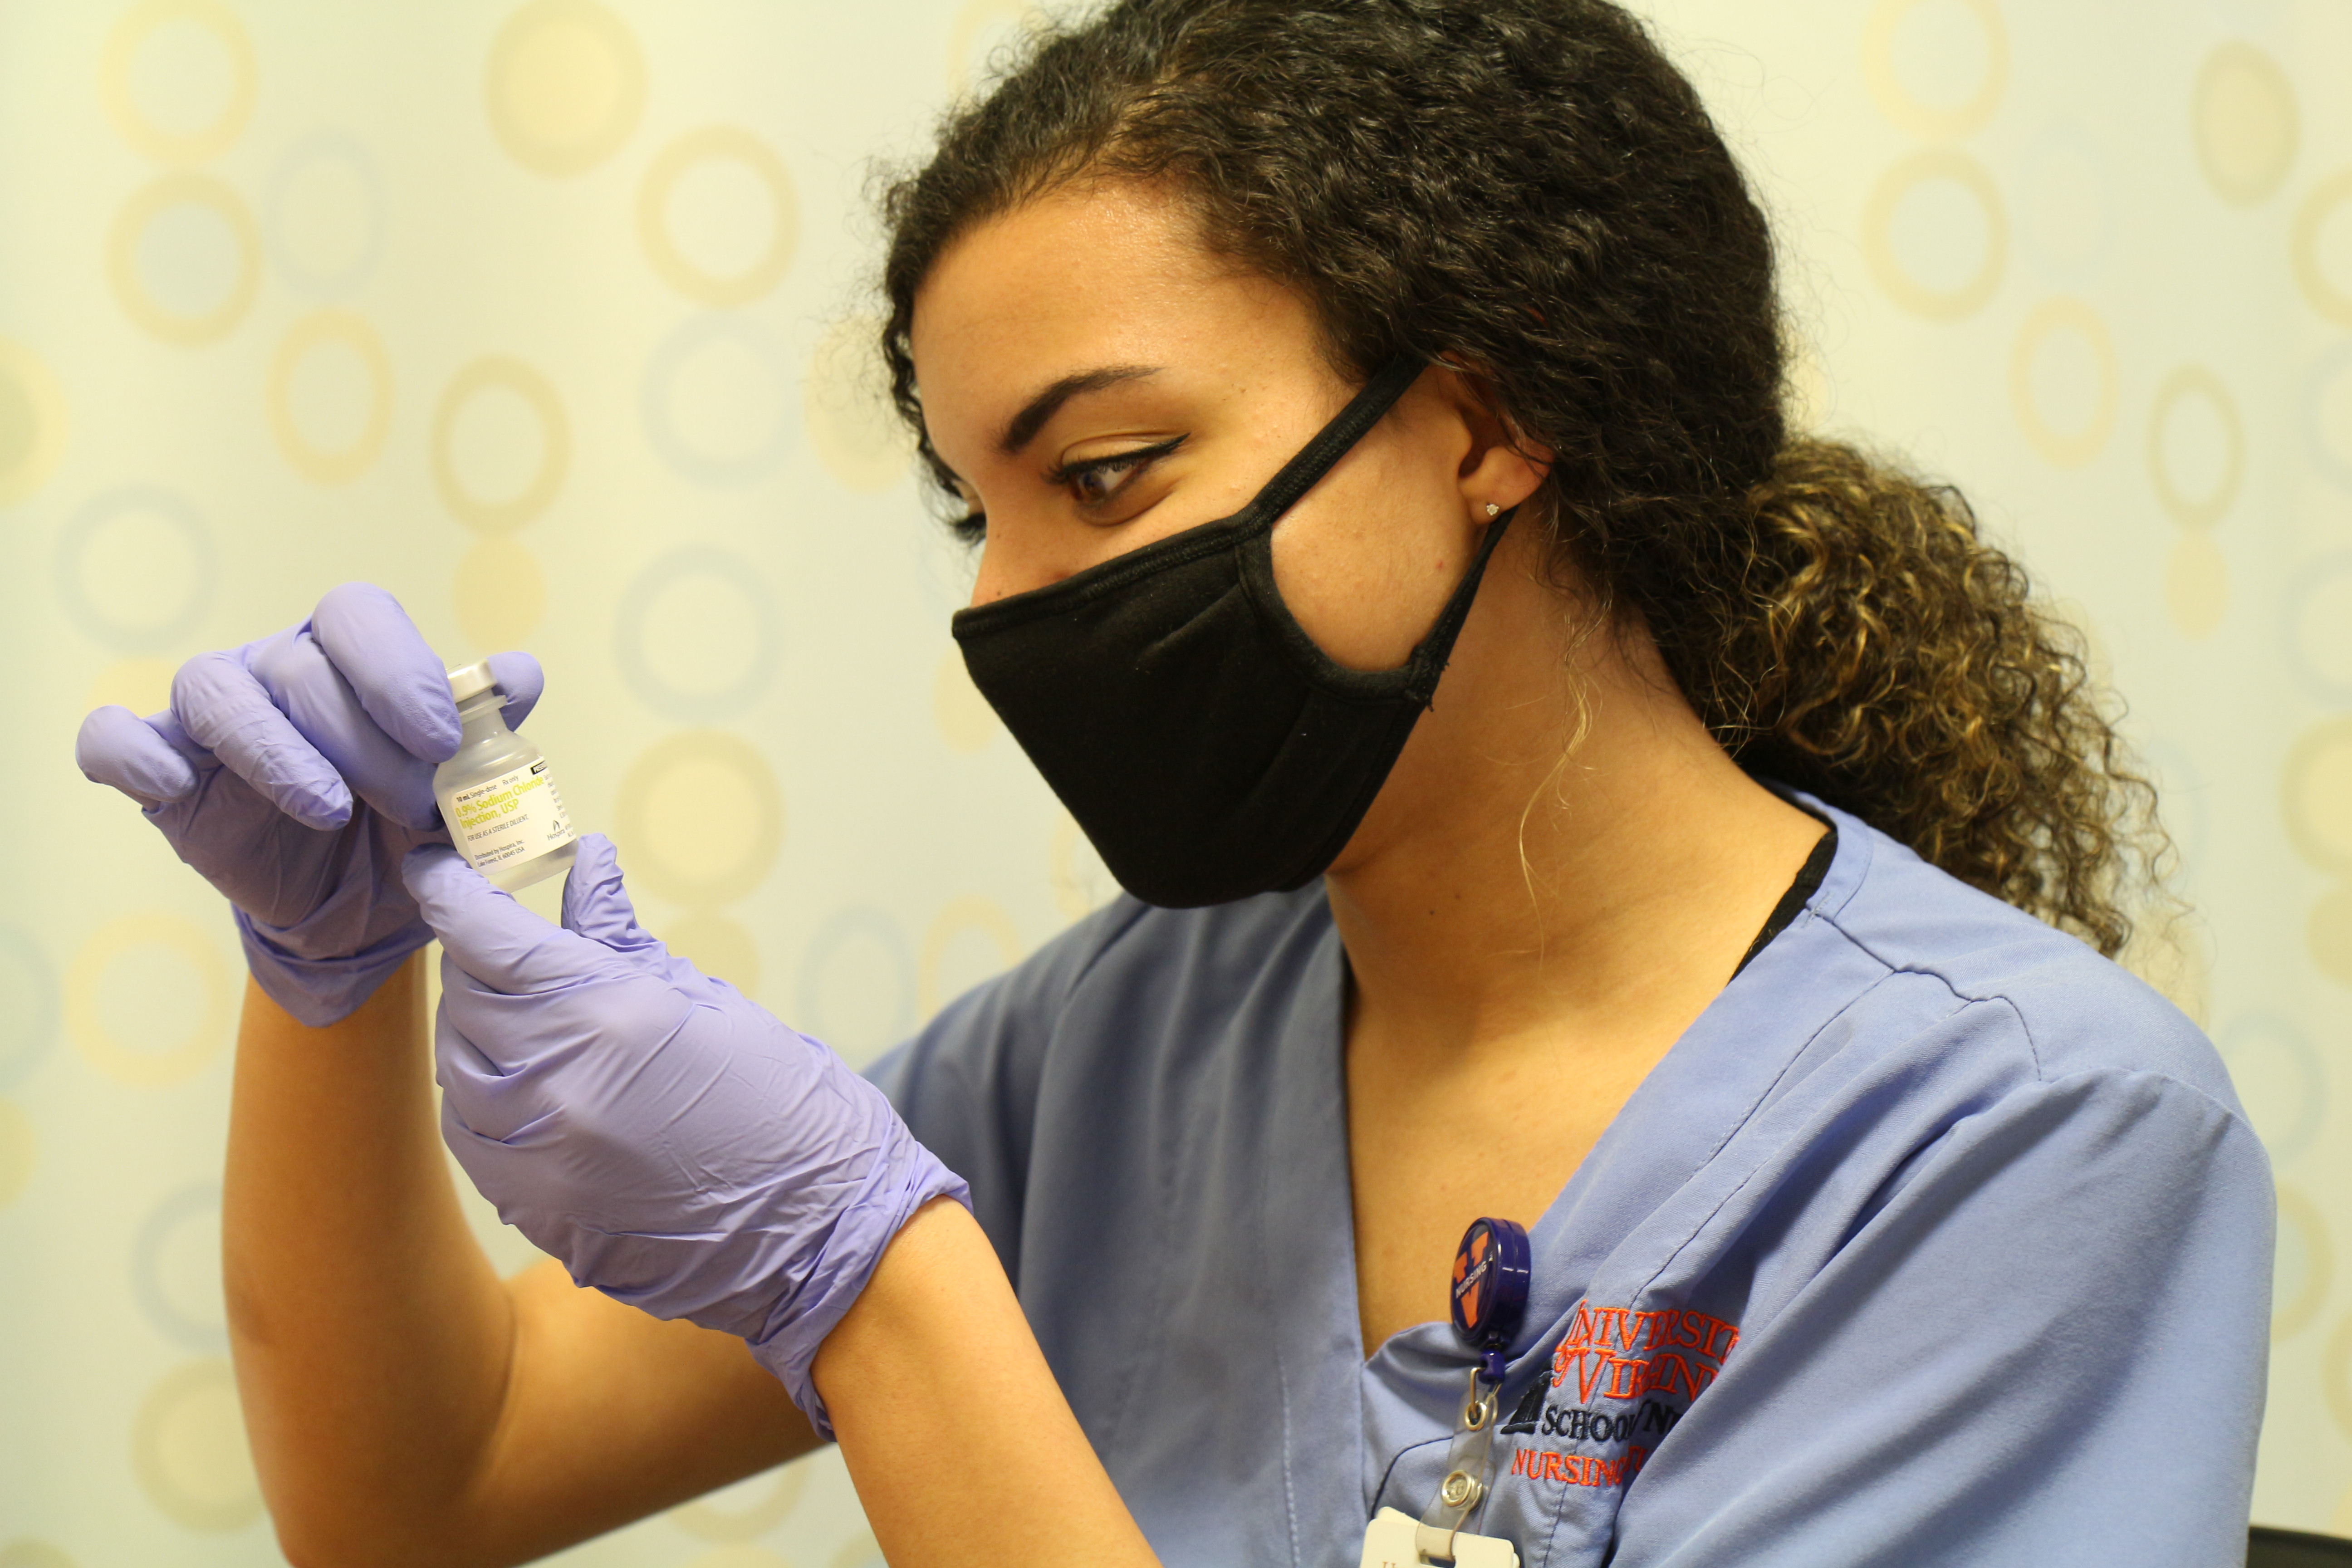 A nursing student preparing an injection